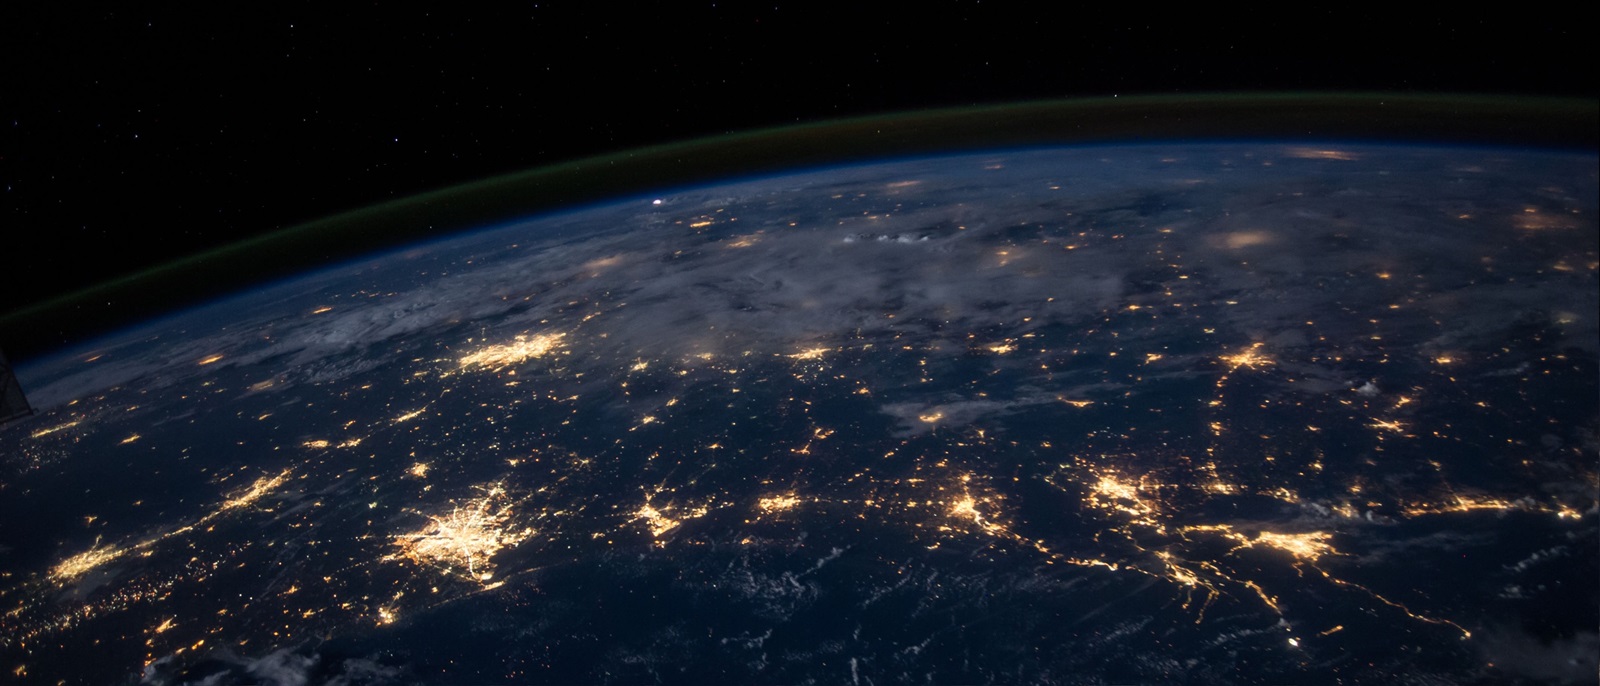 The earth from low level orbit at night featuring many illuminated cities